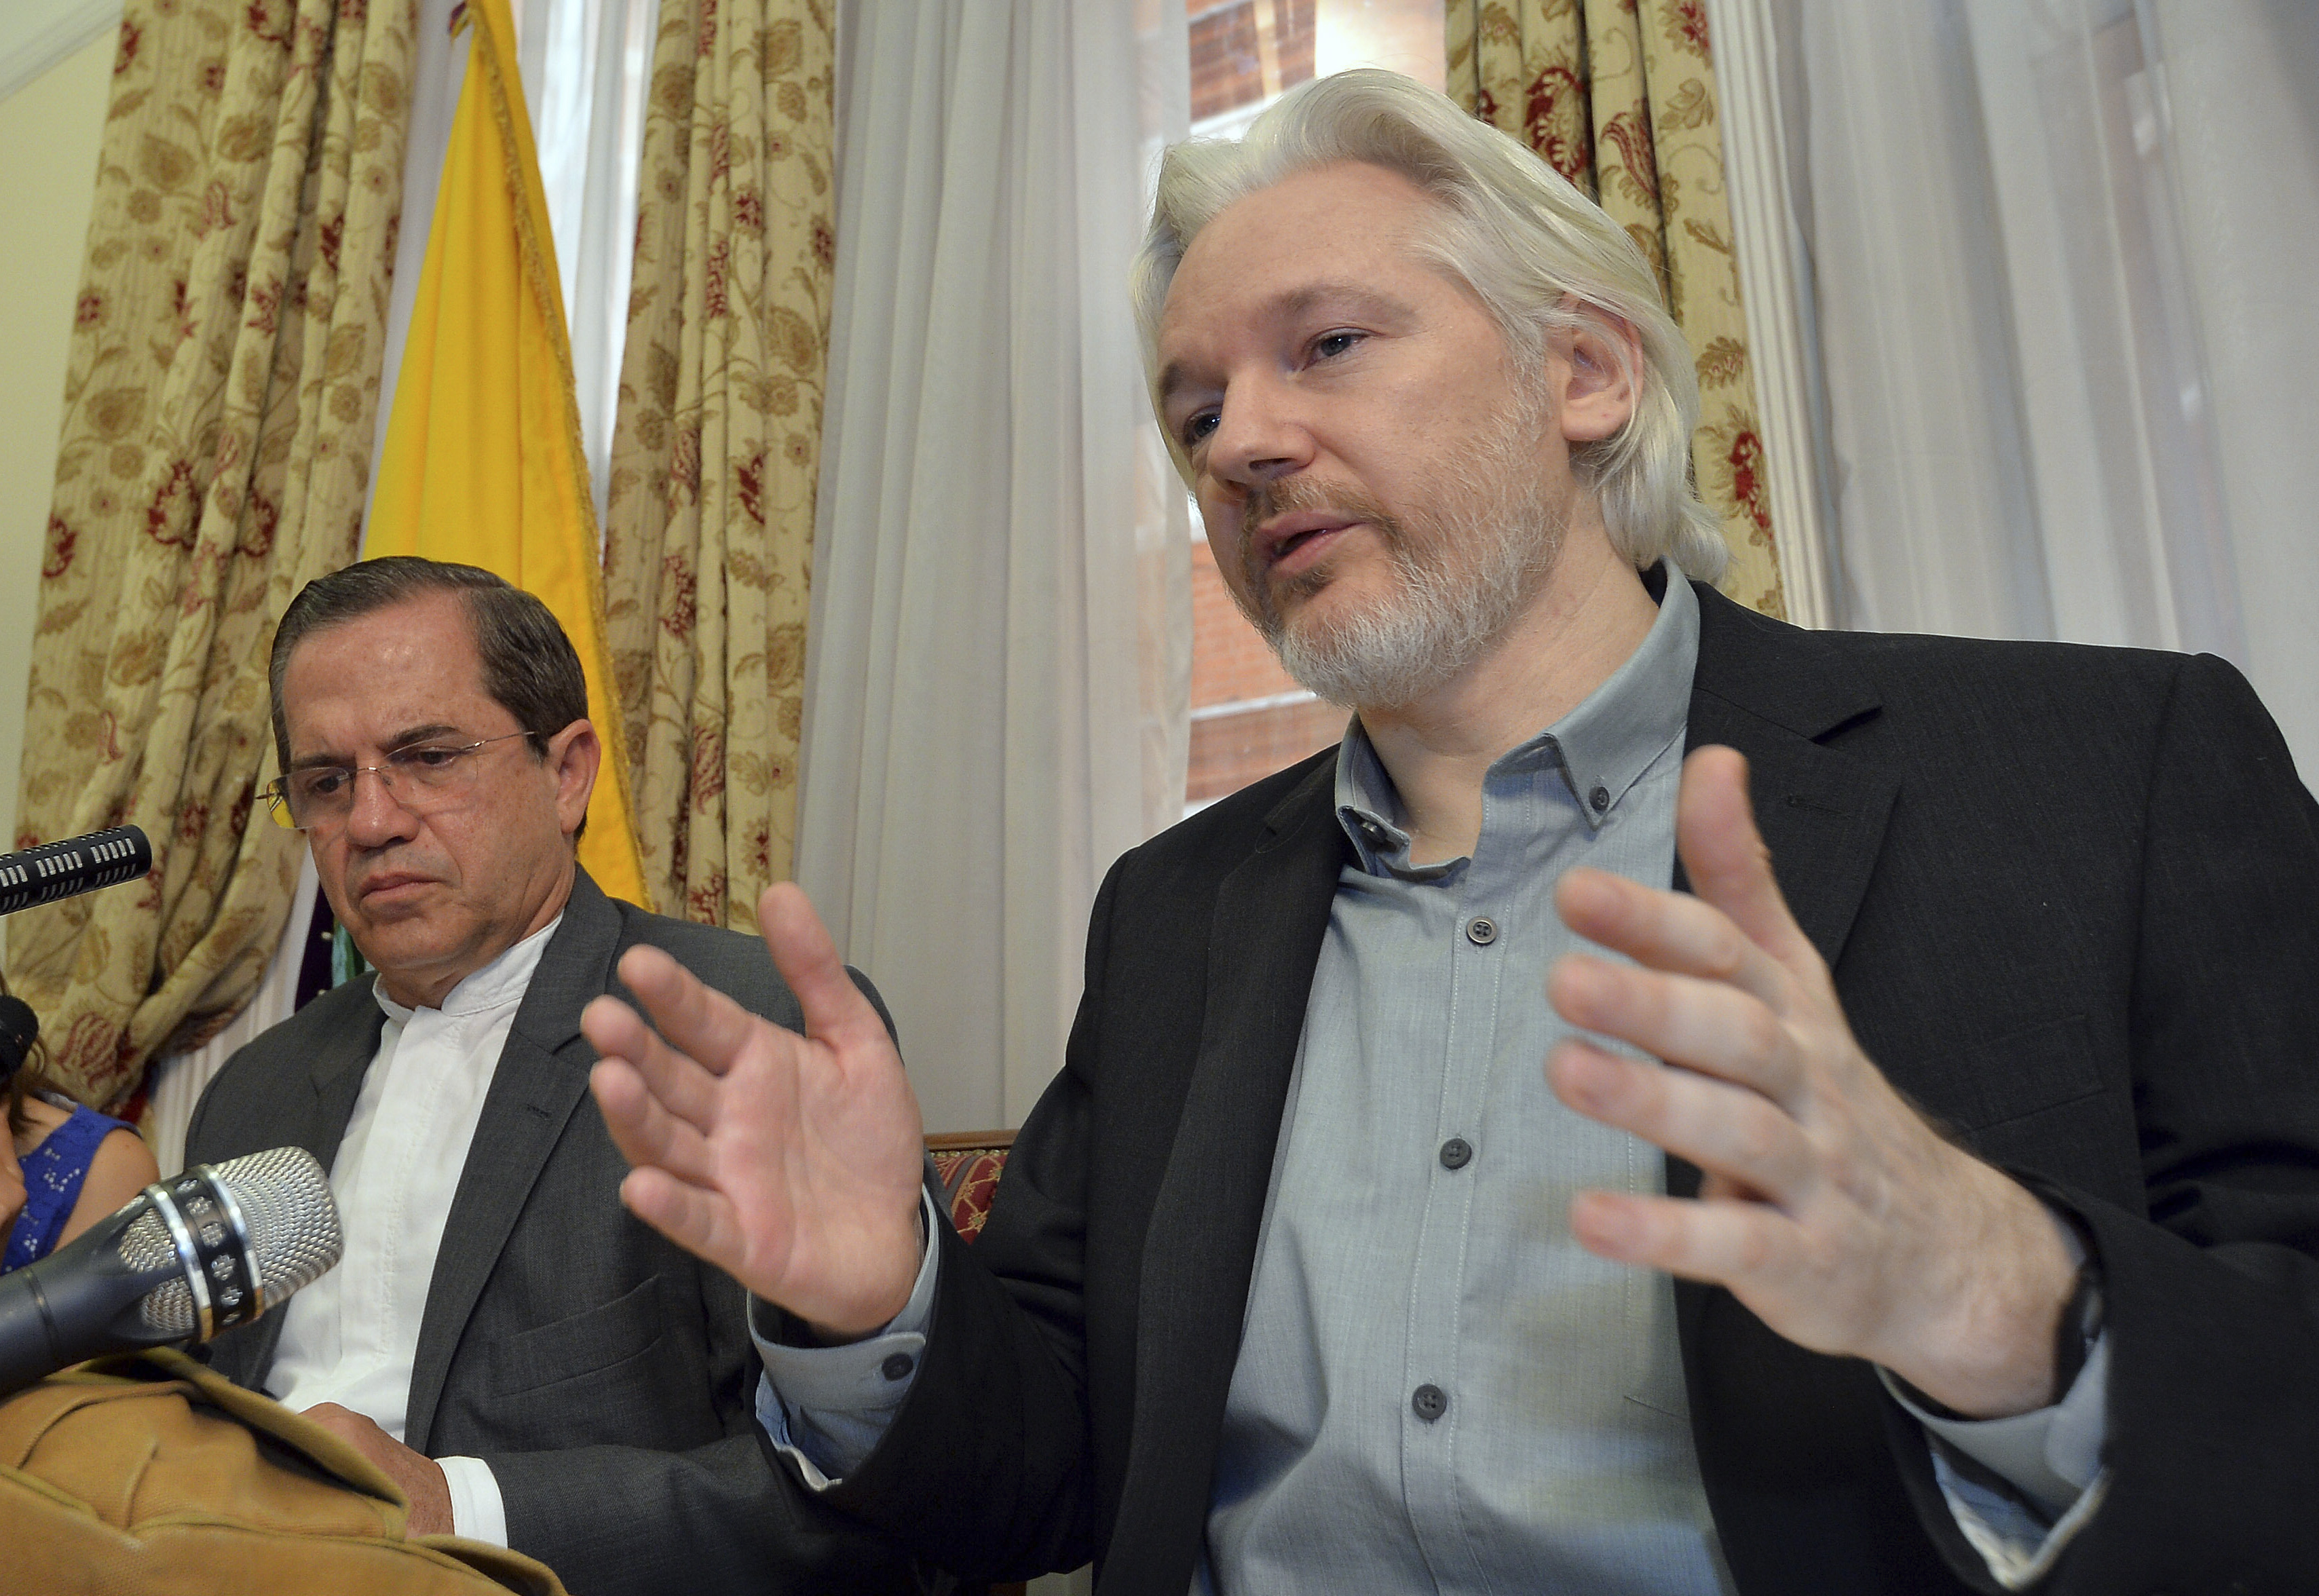 WikiLeaks founder Julian Assange (R) speaks as Ecuador's Foreign Affairs Minister Ricardo Patino listens, during a news conference at the Ecuadorian embassy in central London August 18, 2014 (John Stillwell—Reuters)